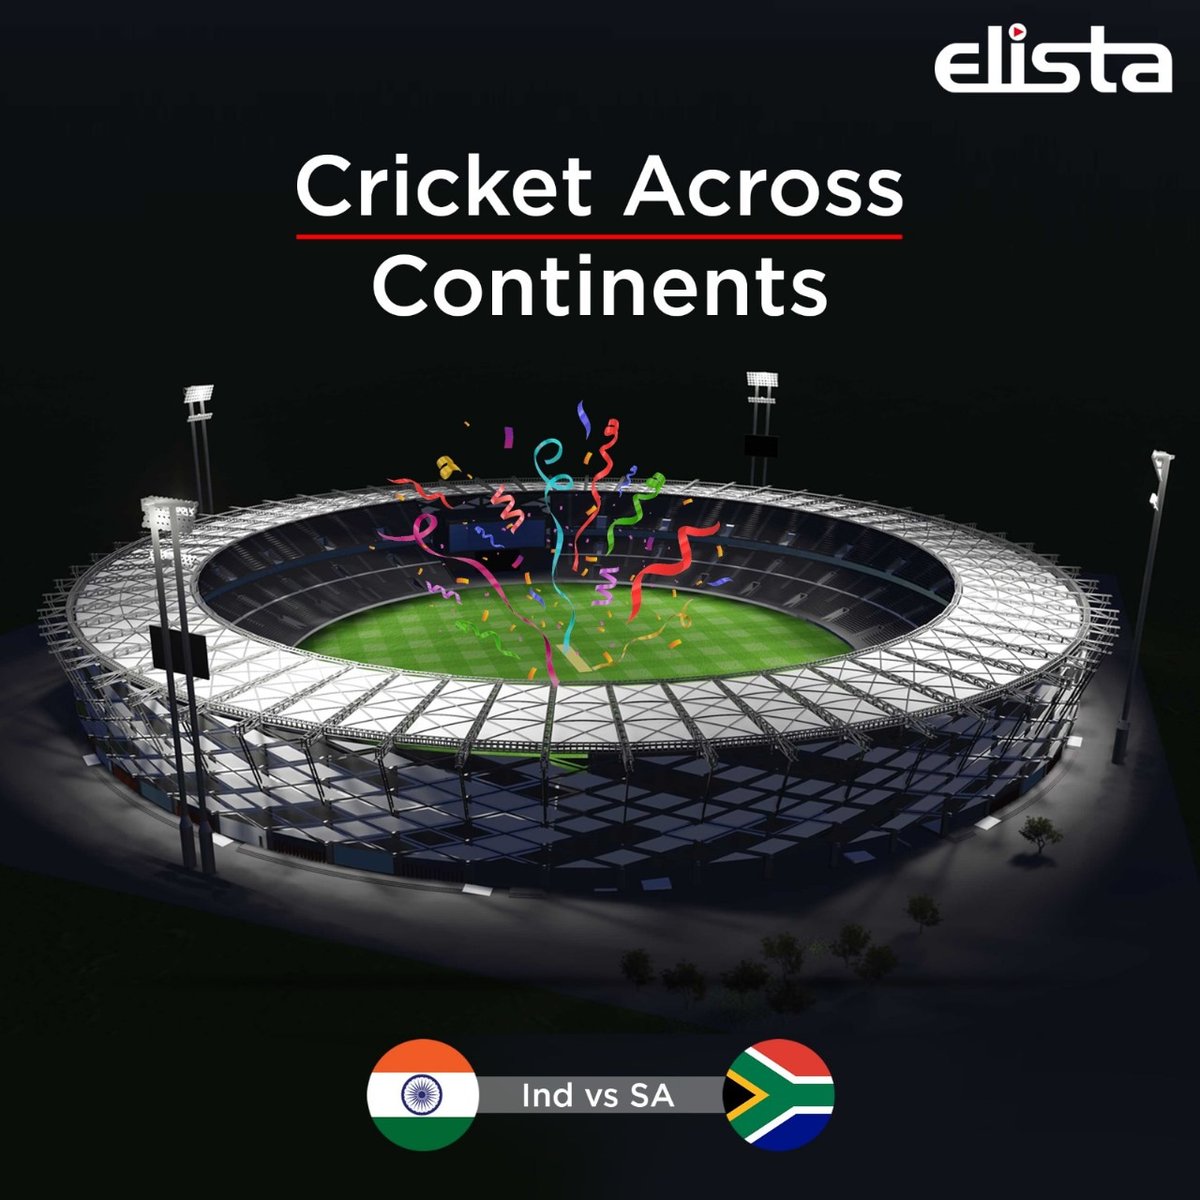 An epic cricket showdown between India and South Africa! 🏏🔥 Get ready for a thrilling contest on the pitch. Who will come out on top?

Click here to check our smart range of SmartTV: amzn.to/3FkQce5